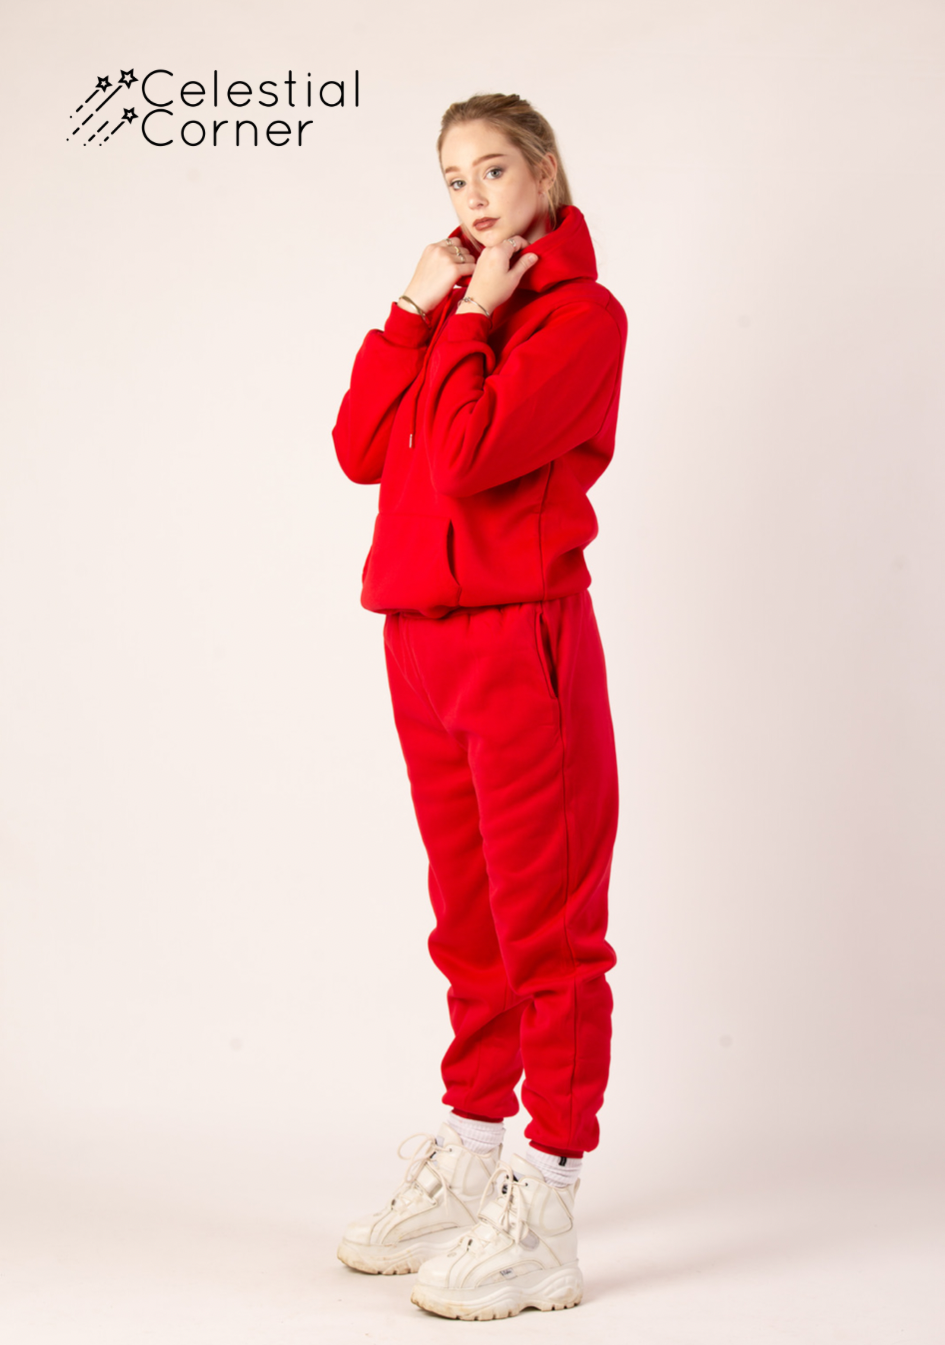 Classic Red Hoodie